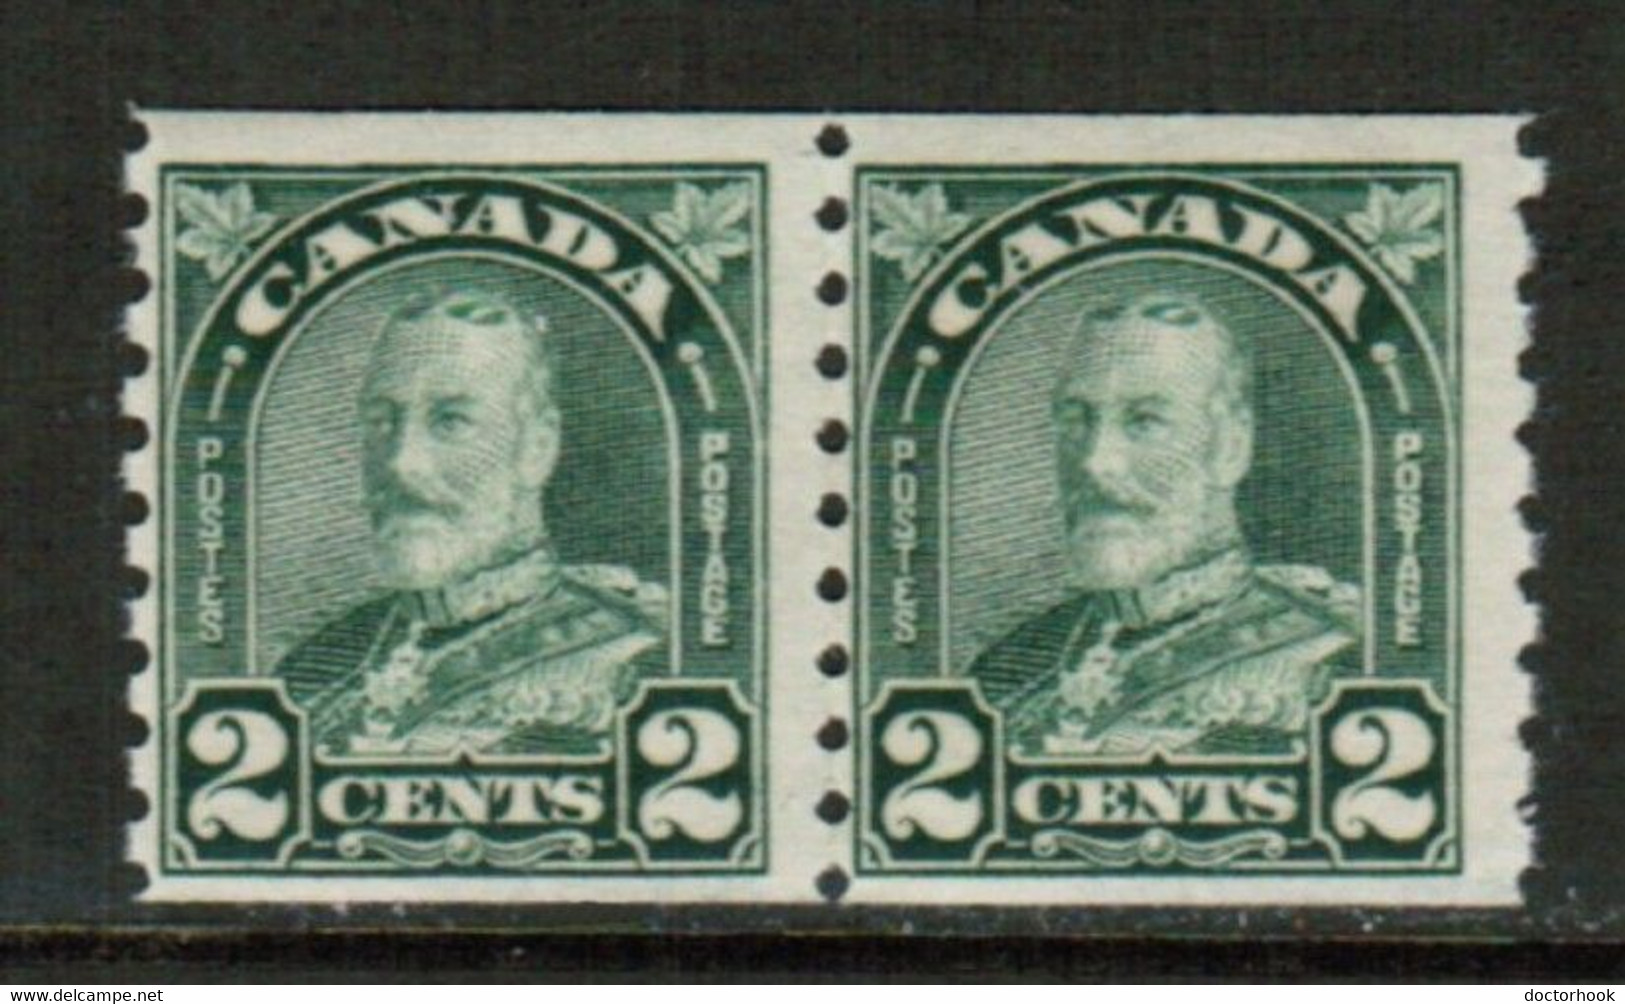 CANADA  Scott # 180* F-VF MINT LH PAIR (Stamp Scan # 783) - Coil Stamps